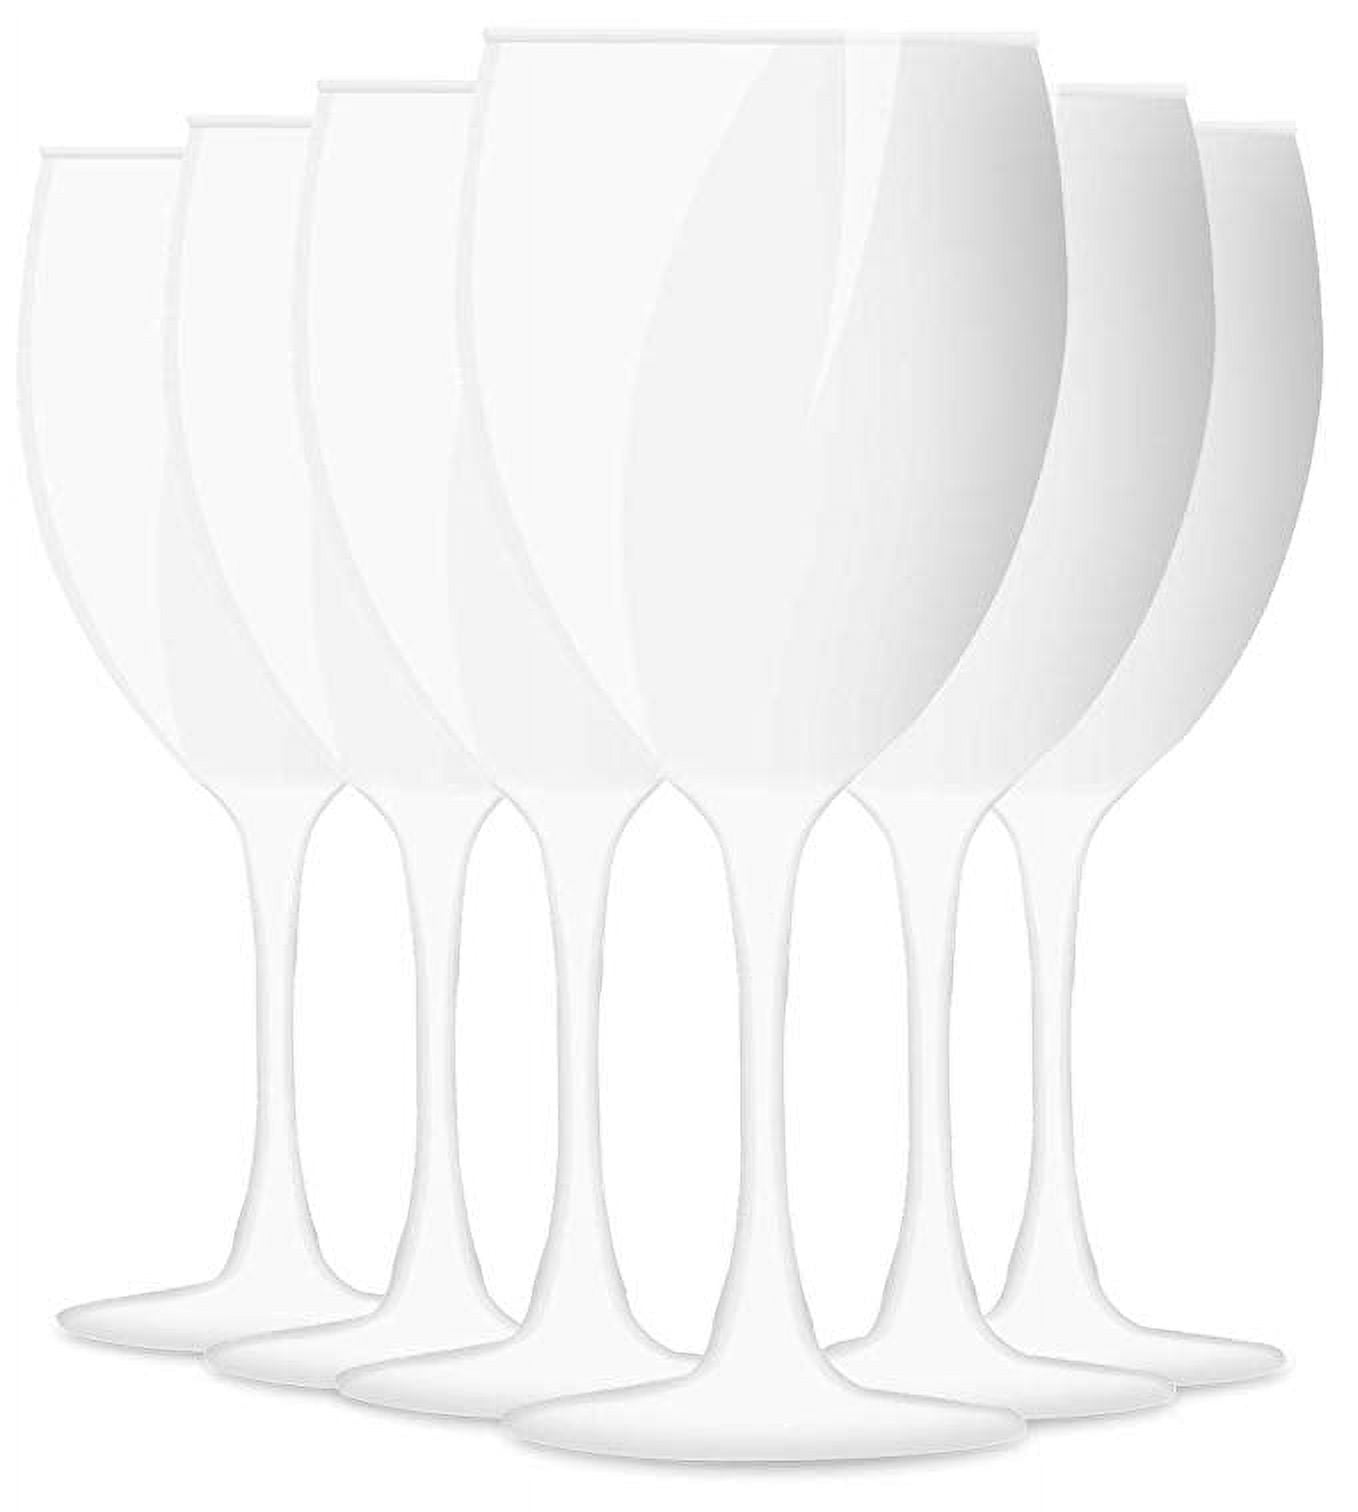 TableTop King Colored Wine Glasses Set of 6 - Colorful Stem Wine  Glasses 10 Oz - Red Nuance Accent Cute Wine Glass Set - Sturdy Drinking  Glasses - Multiple Vibrant